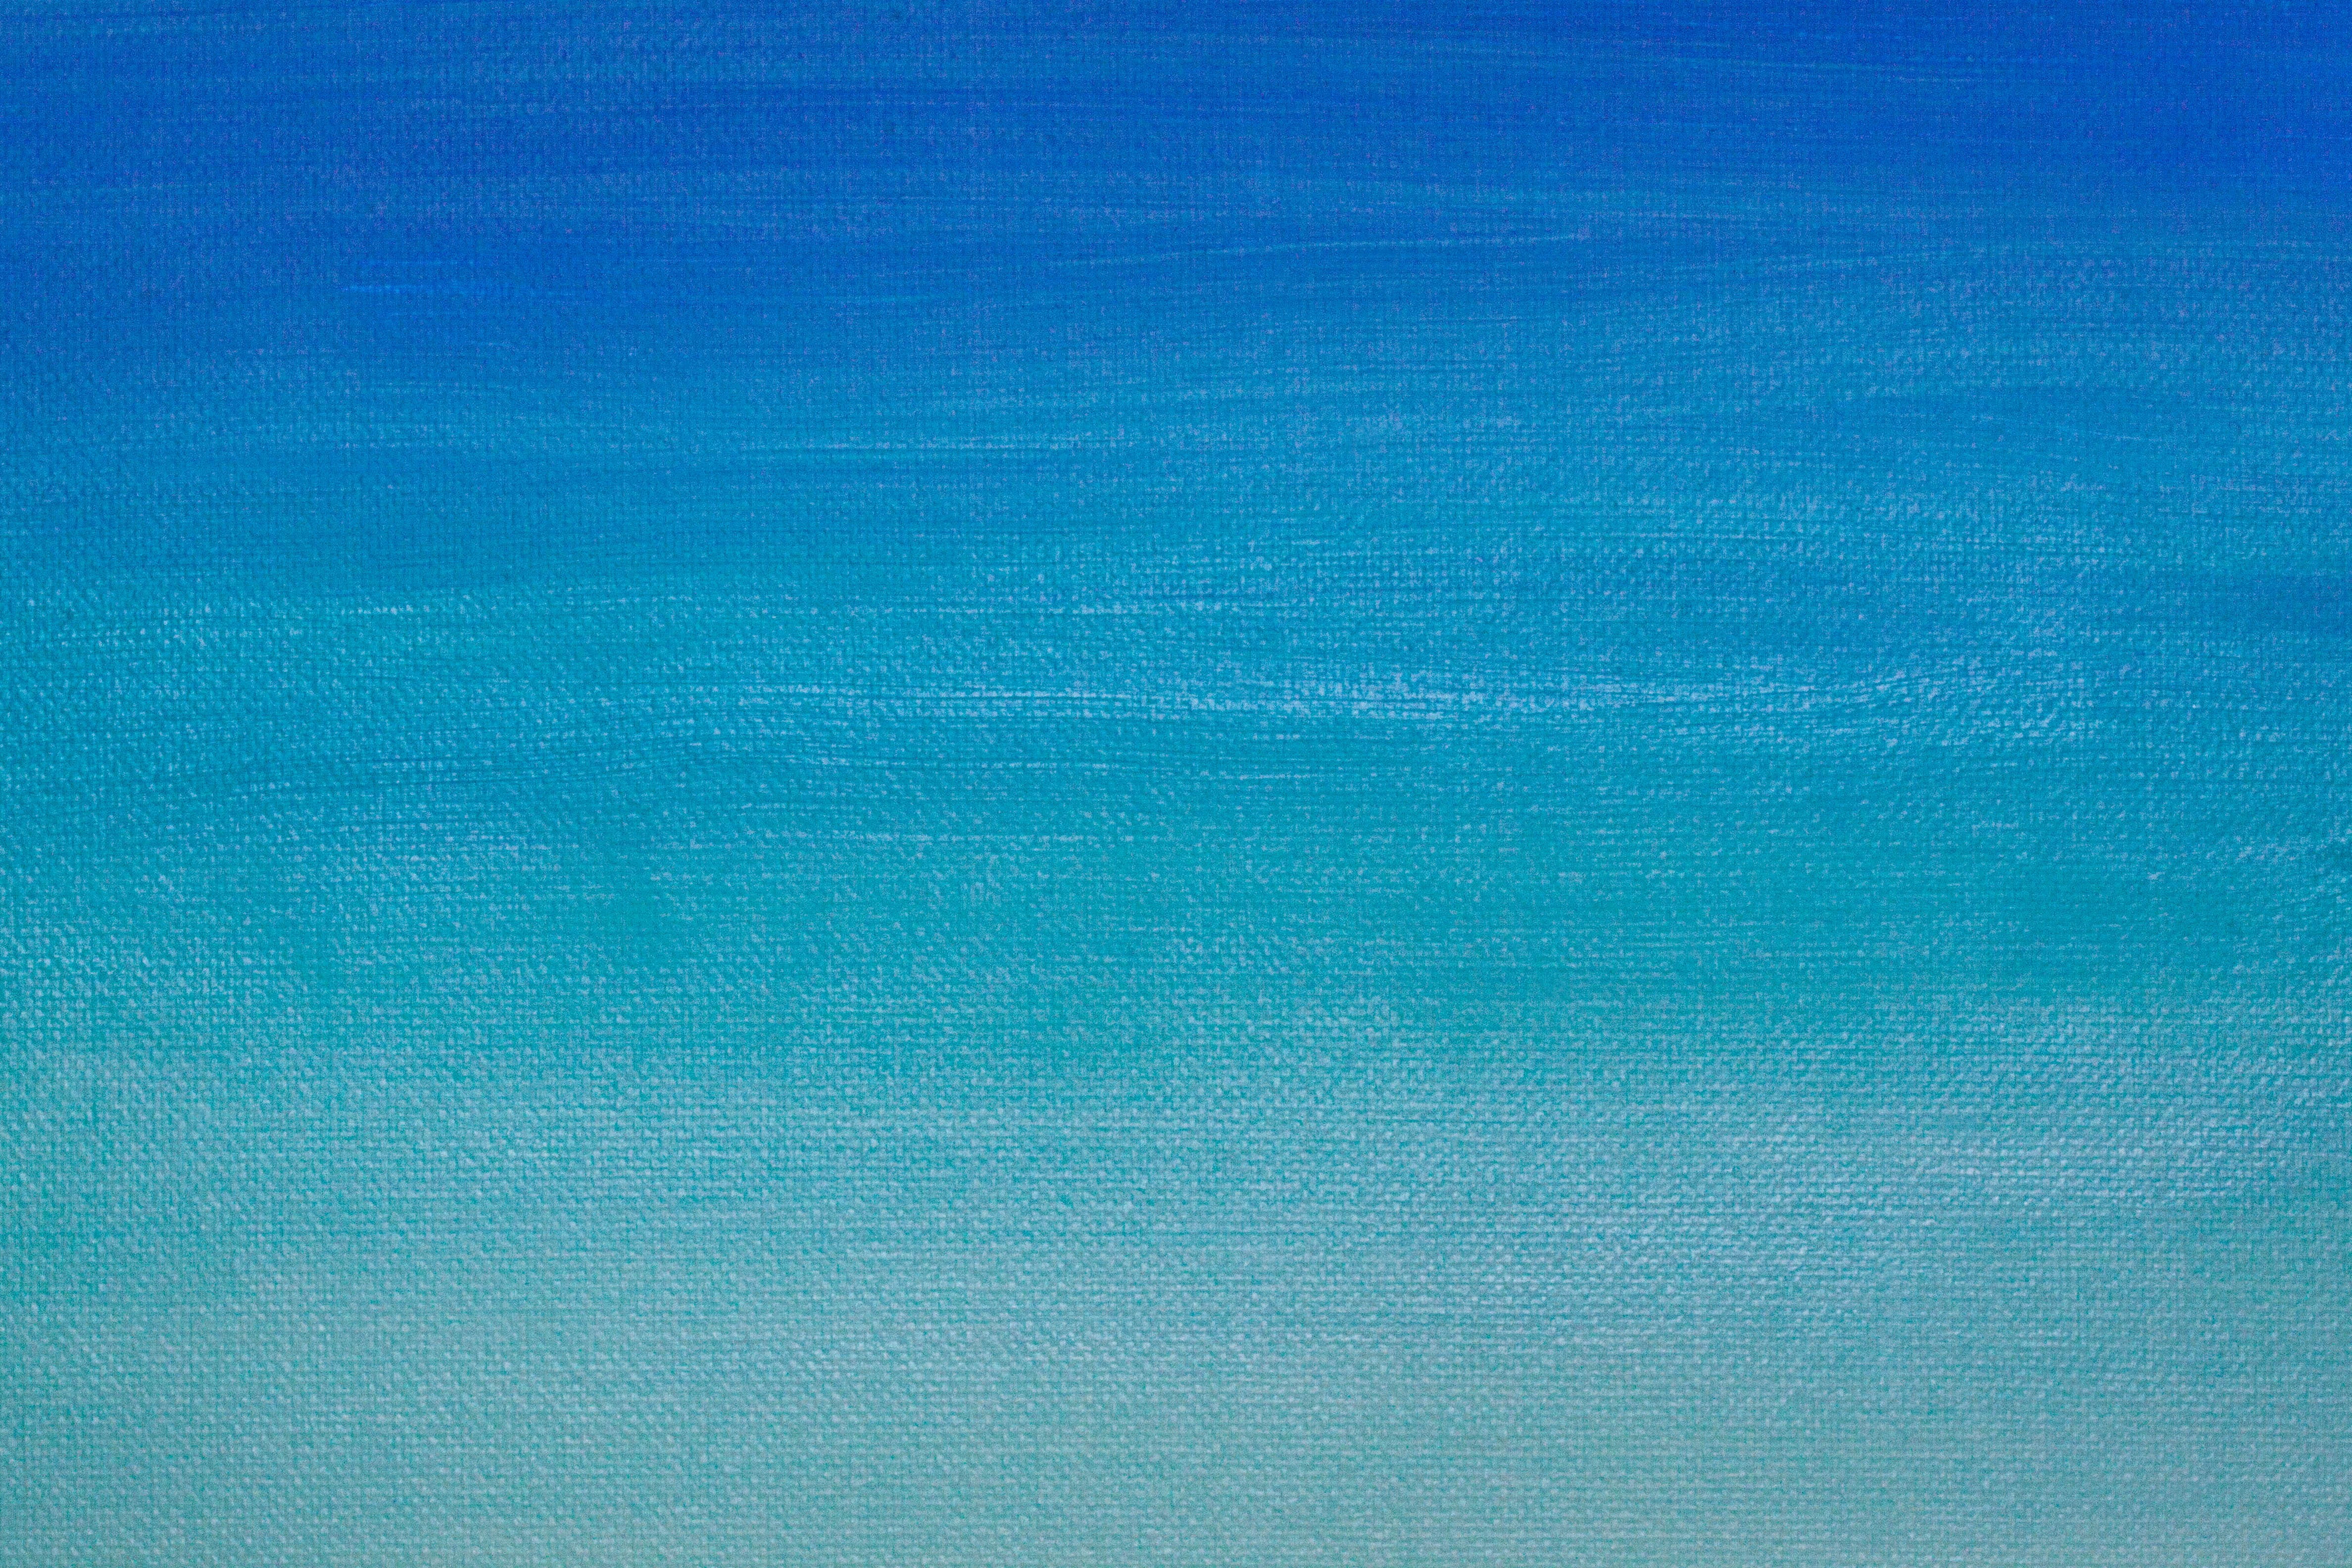 blue and teal wallpaper, paint, painting, image, design, abstract expressionism